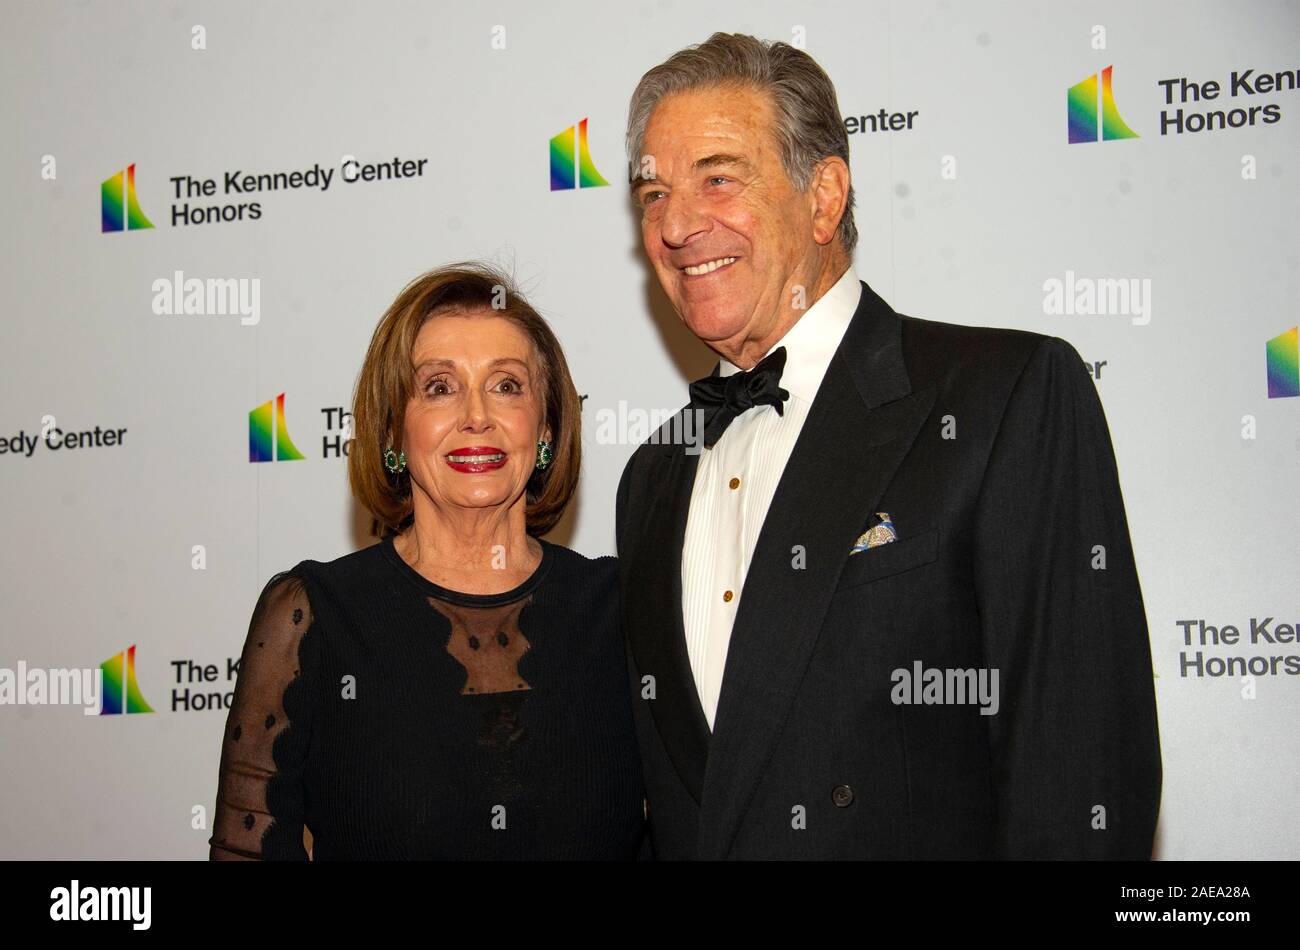 Washington DC, USA. 07th Dec, 2019. Speaker of the United States House of Representatives Nancy Pelosi (Democrat of California) and her husband, Paul, arrive for the formal Artist's Dinner honoring the recipients of the 42nd Annual Kennedy Center Honors at the United States Department of State in Washington, DC on Saturday, December 7, 2019. The 2019 honorees are: Earth, Wind & Fire, Sally Field, Linda Ronstadt, Sesame Street, and Michael Tilson Thomas. Credit: MediaPunch Inc/Alamy Live News Stock Photo